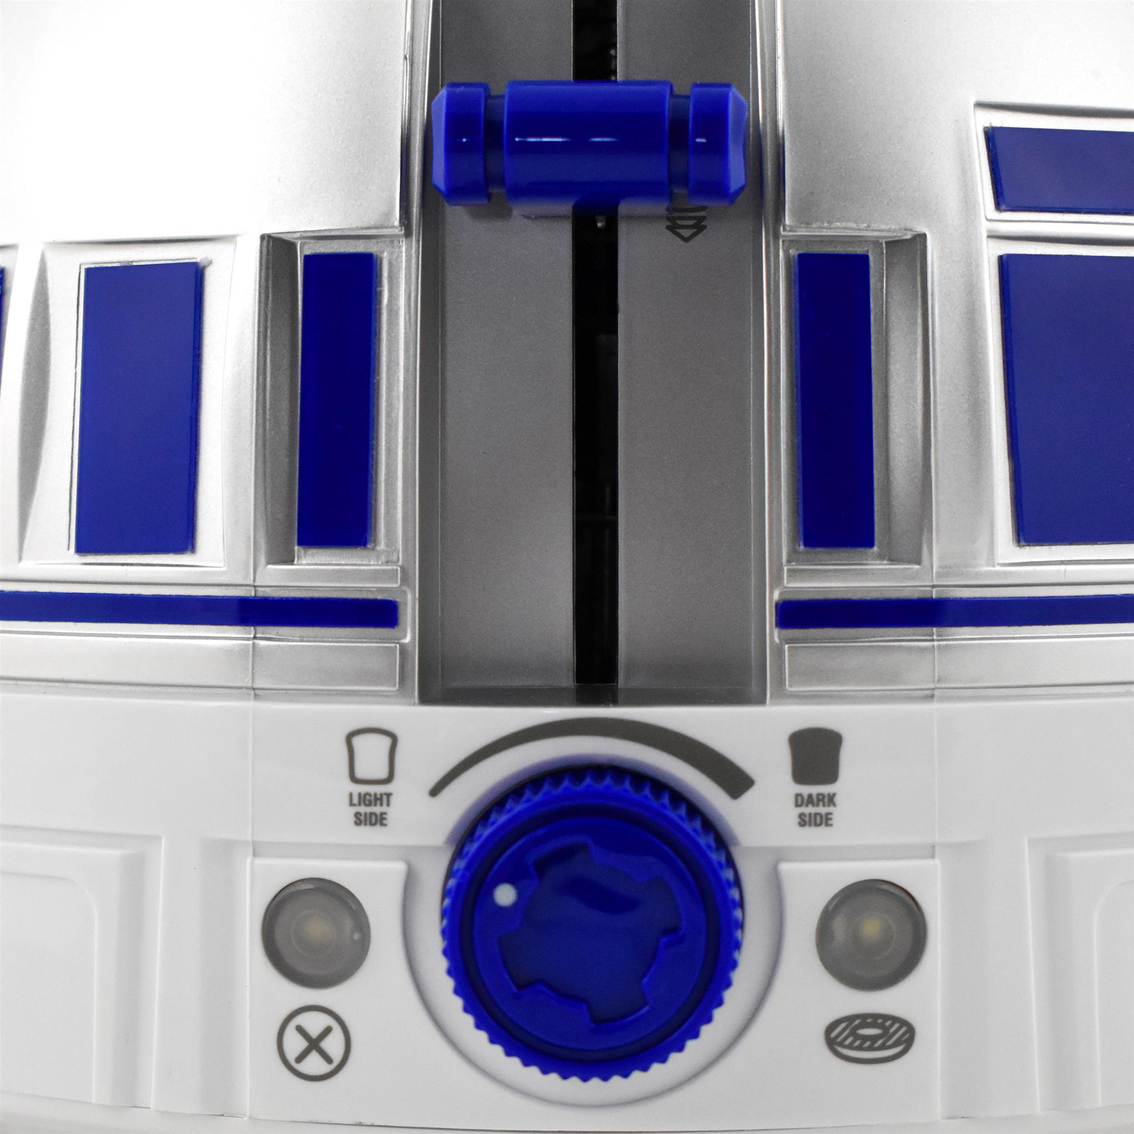 Star Wars R2-D2 Deluxe Toaster - Image 4 of 6